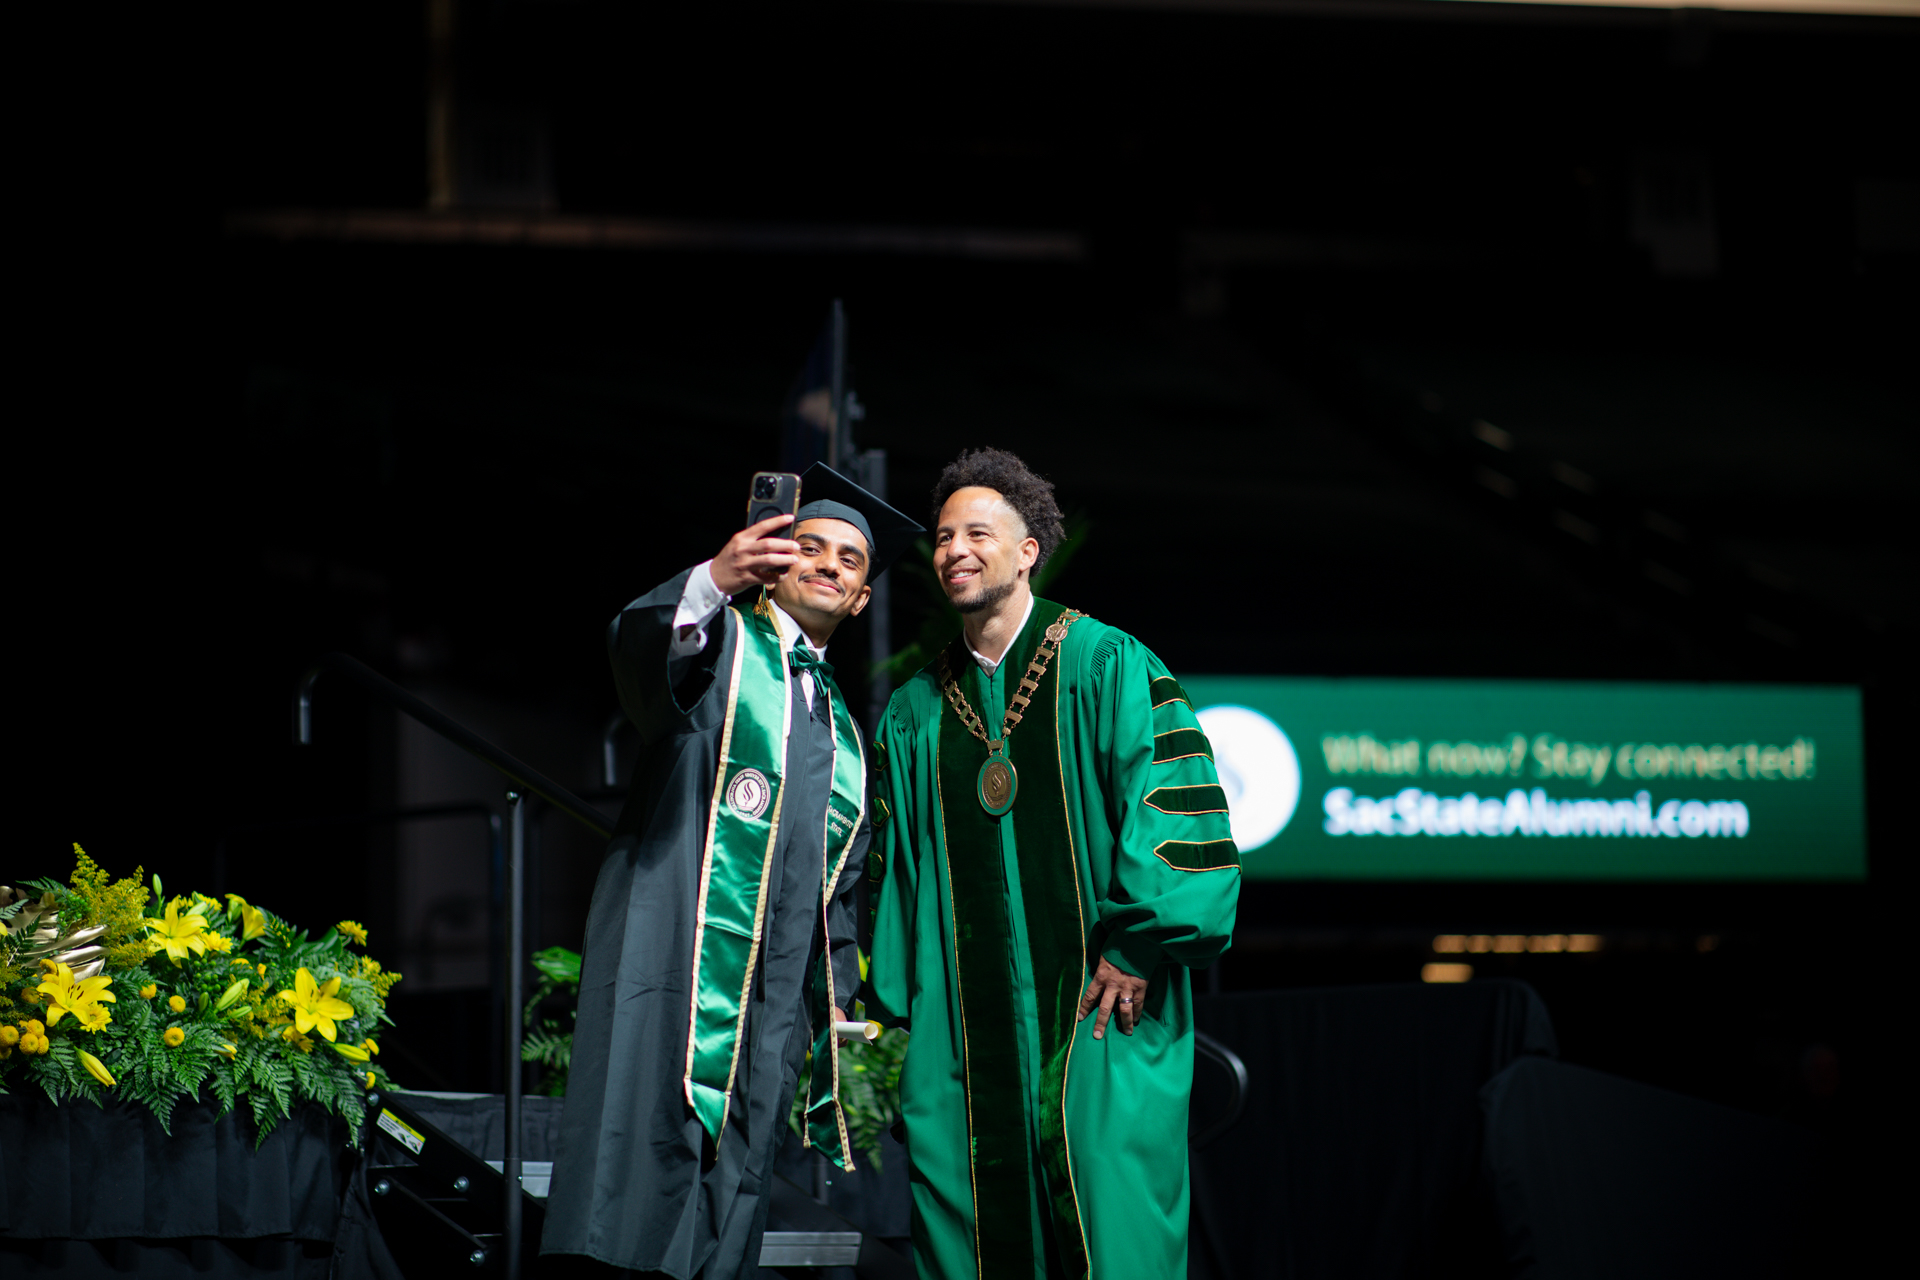 President Wood takes a selfie with a graduate from the Commencement stage.